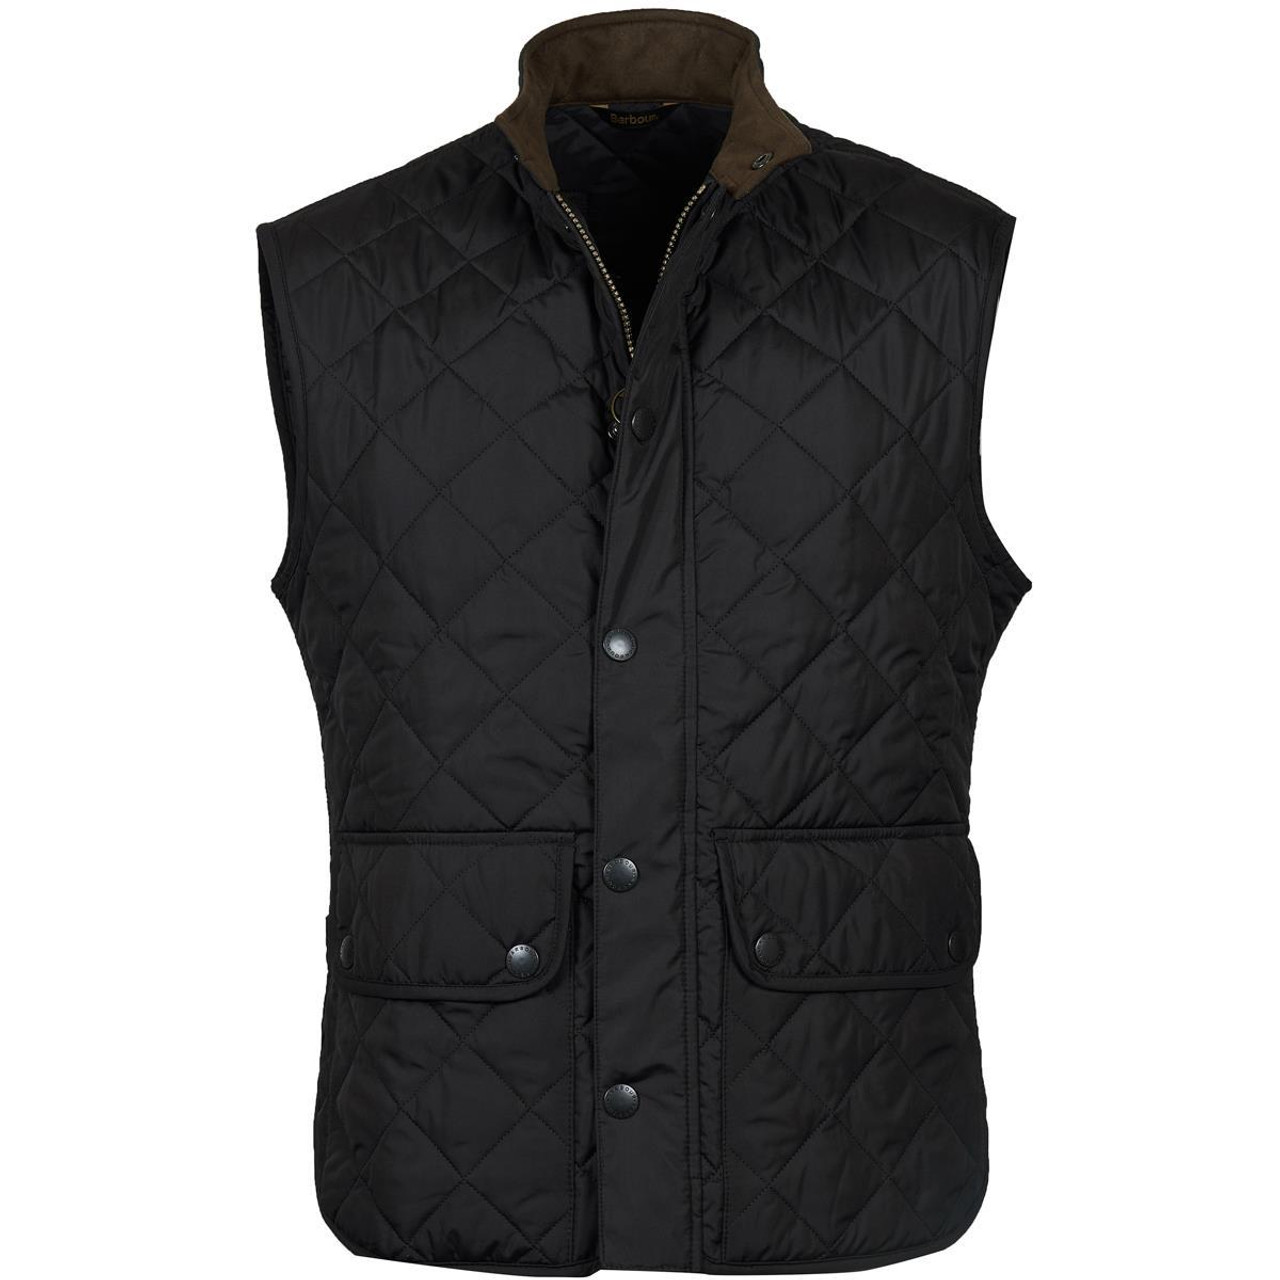 Is the barbour lowerdale gilet a loose or snug fit?